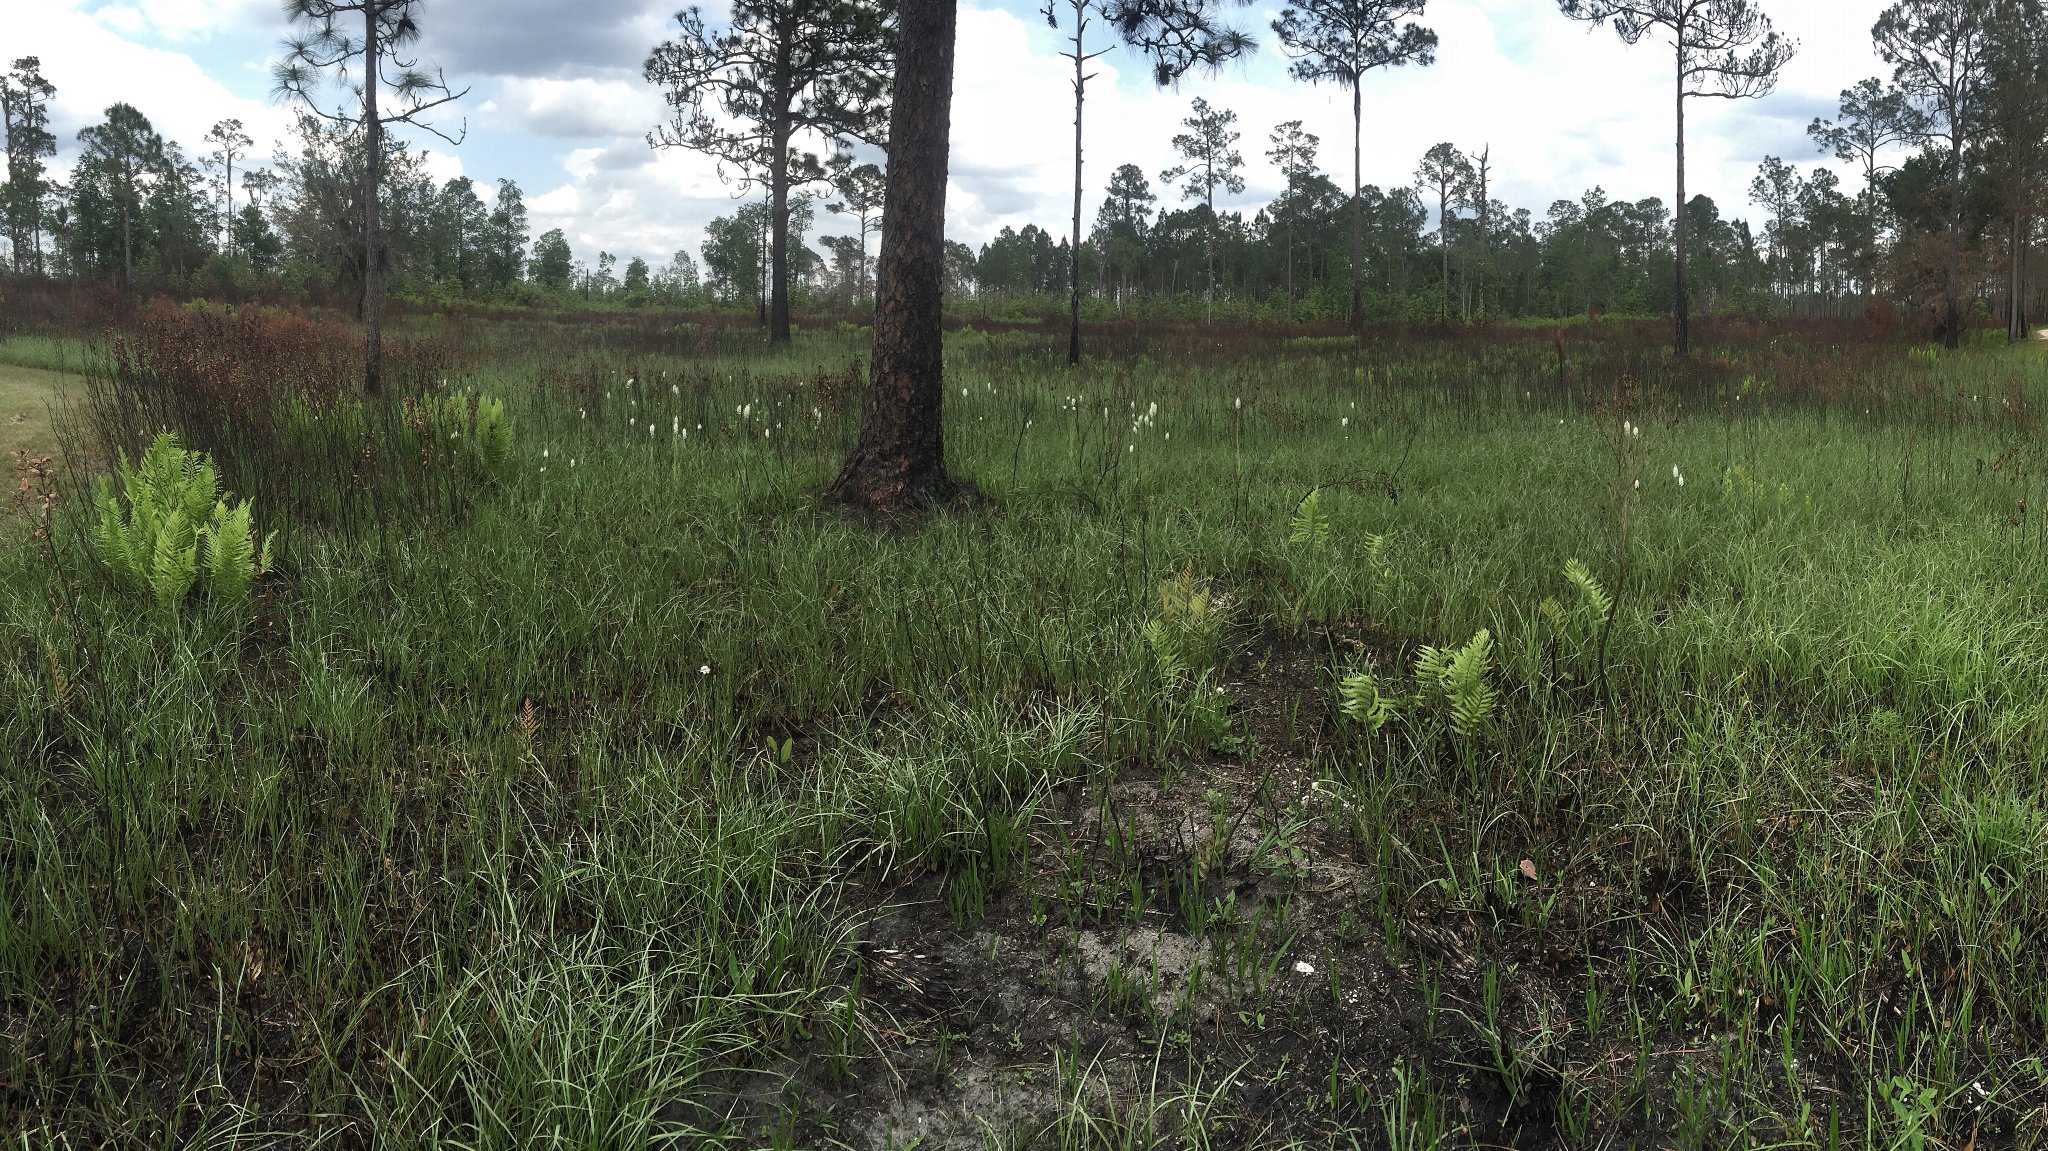 Lush green grasses, the white flowers of Osceola’s plume and cutthroat grass can be seen low to the ground with pine trees in the background. Plants recover quickly after a prescribed fire.